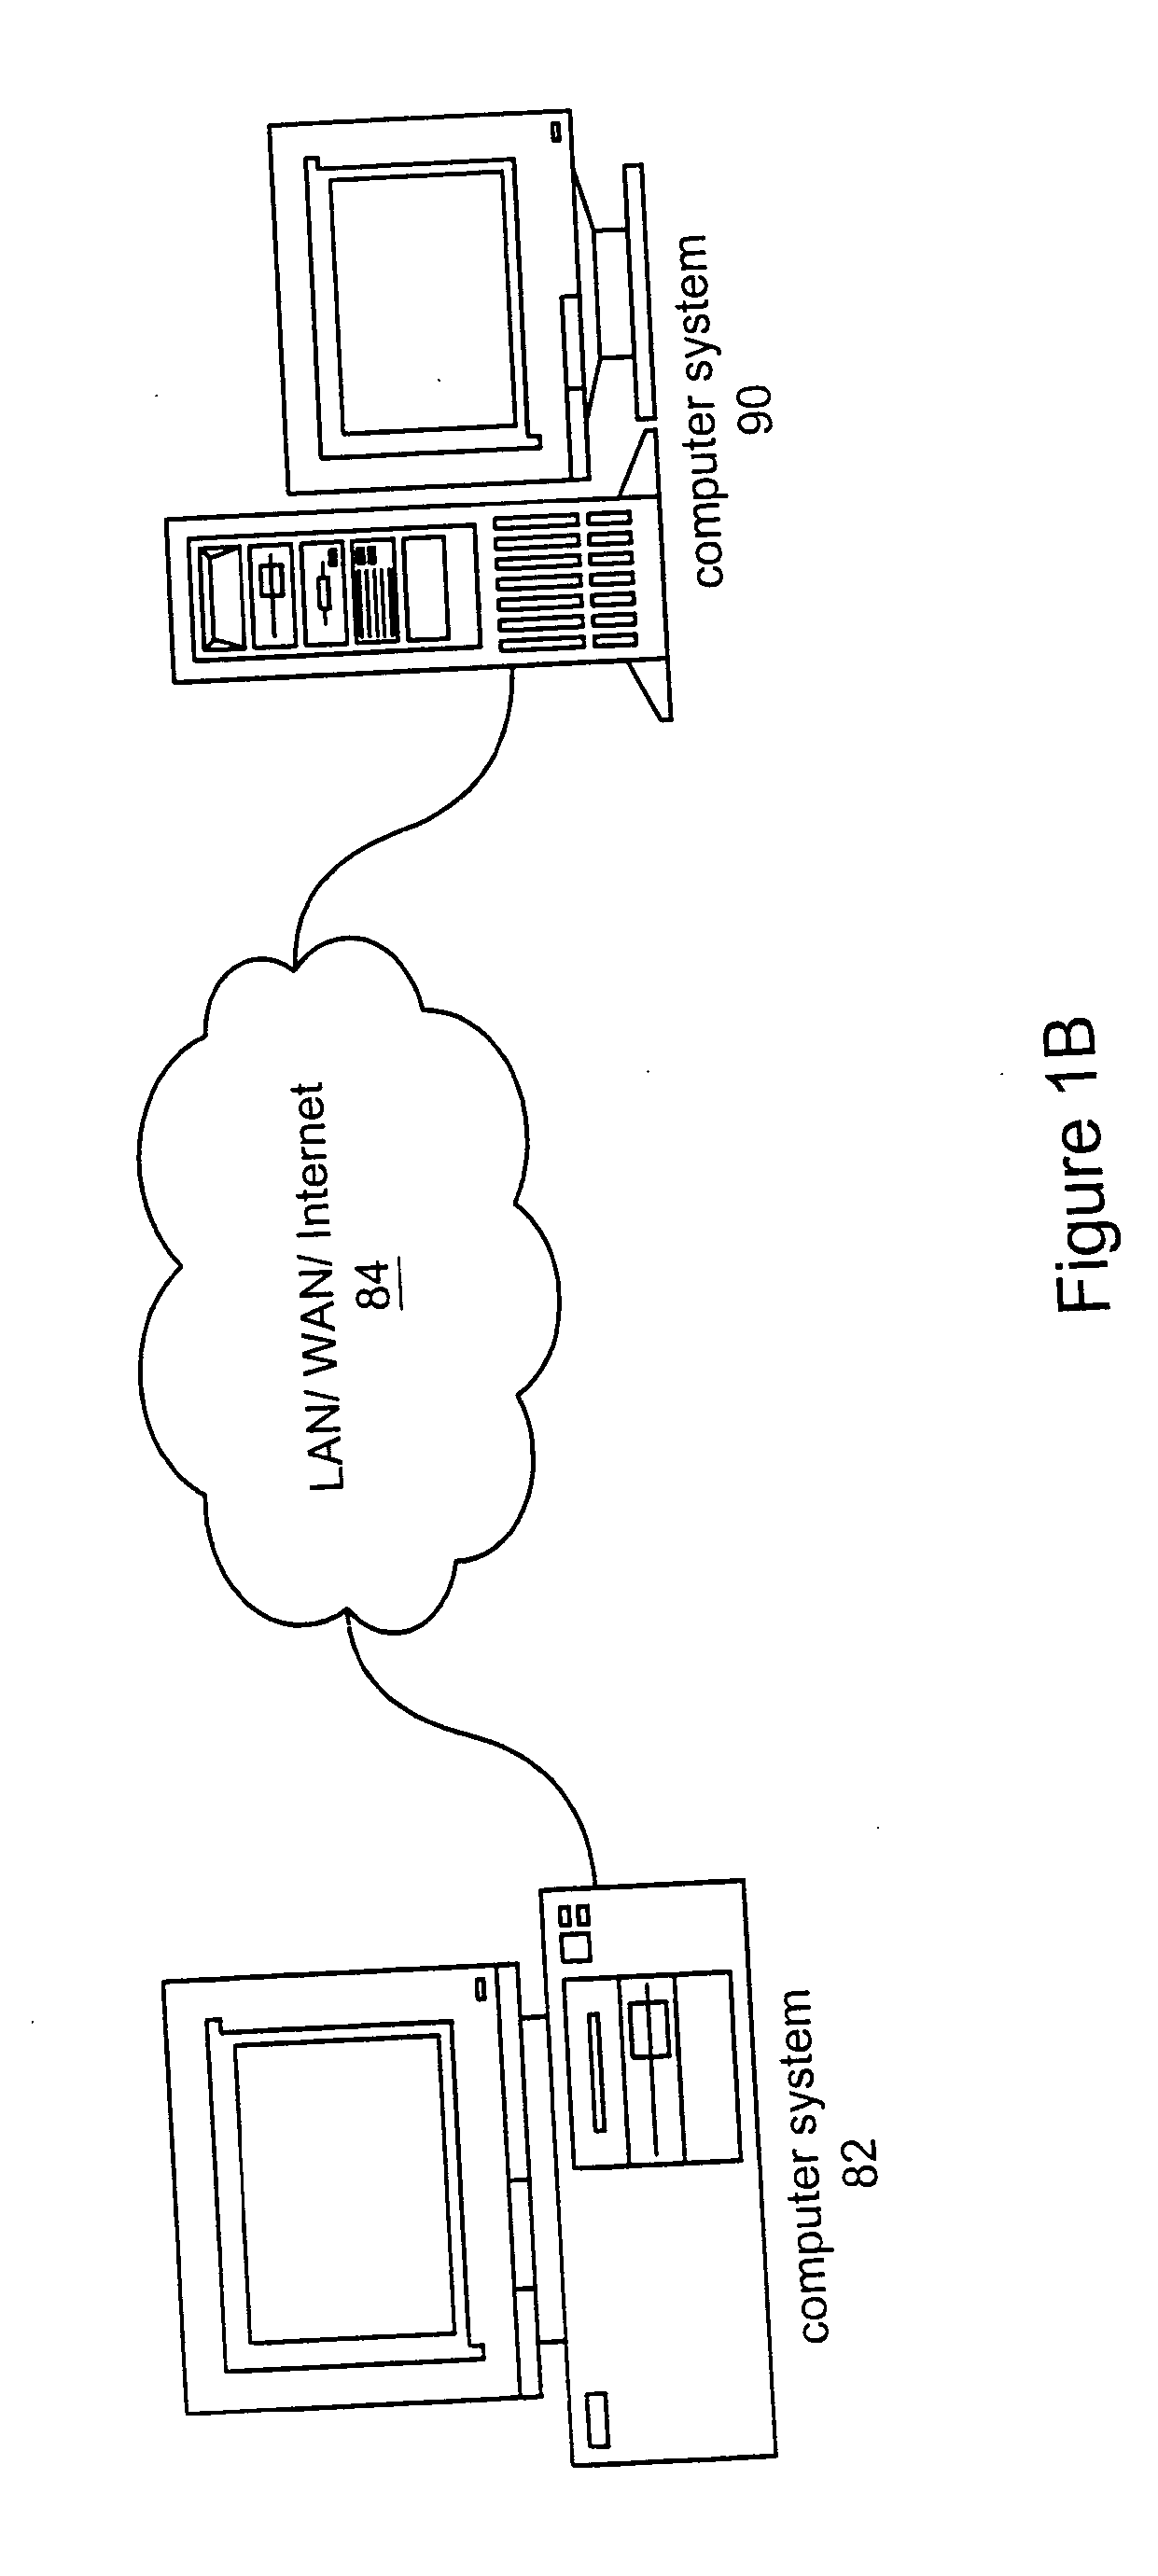 Static binding of nodes to virtual instruments in a graphical program